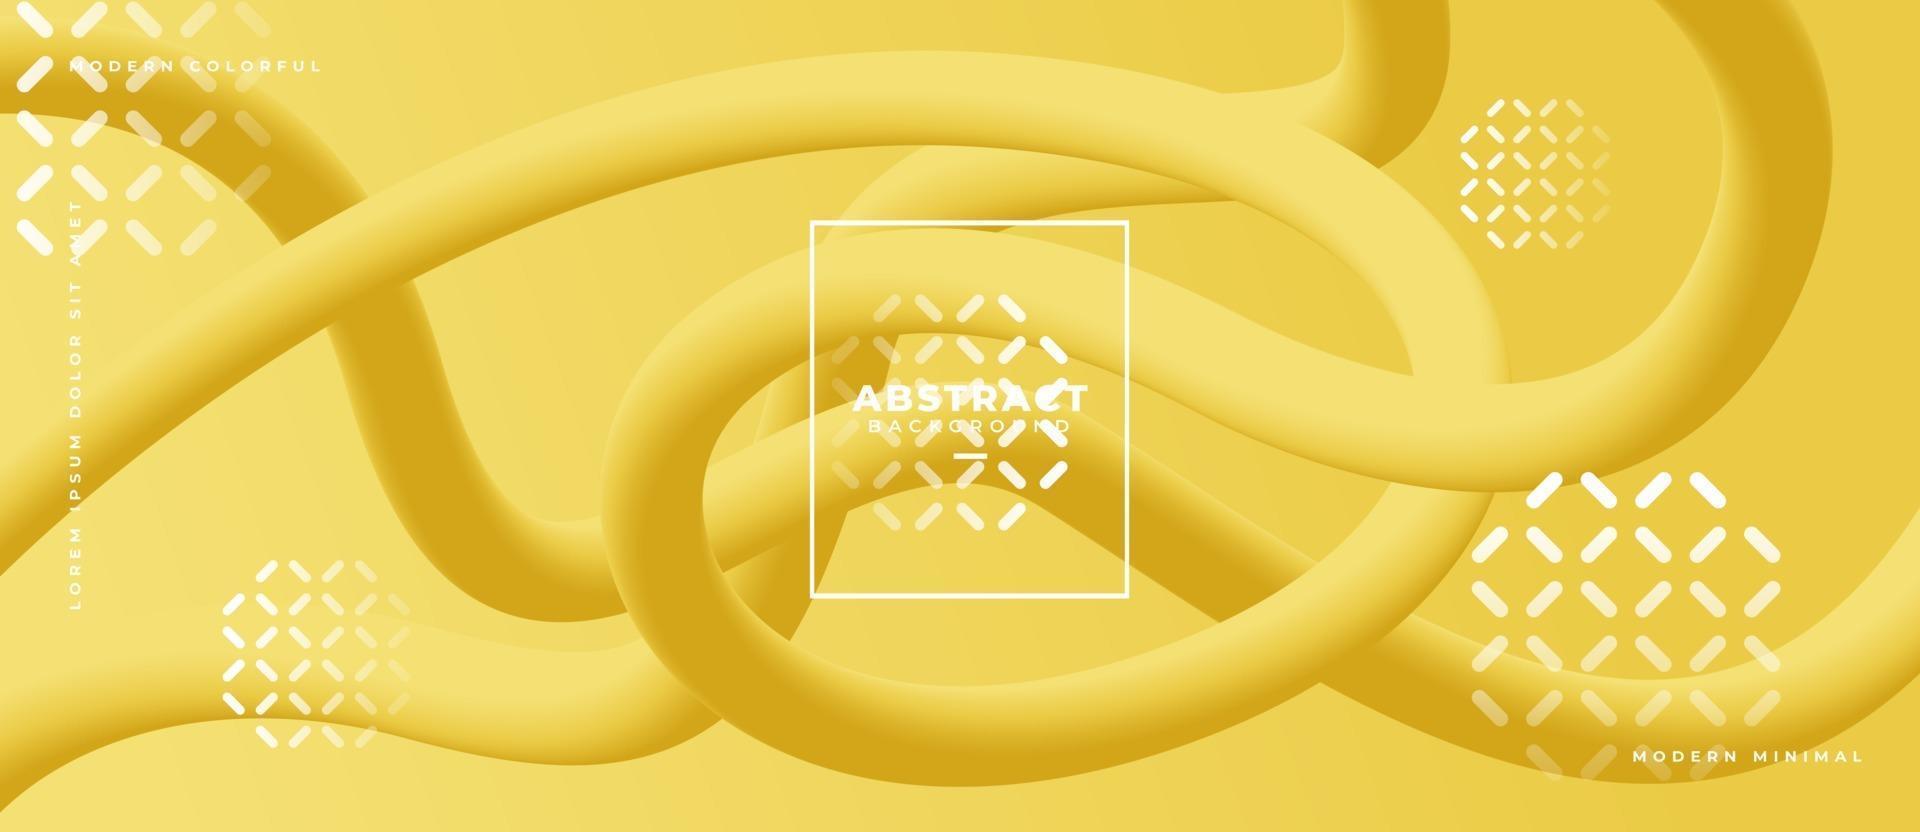 Abstract 3d curved path duotone yellow shape with geometric shape on yellow gradient background vector